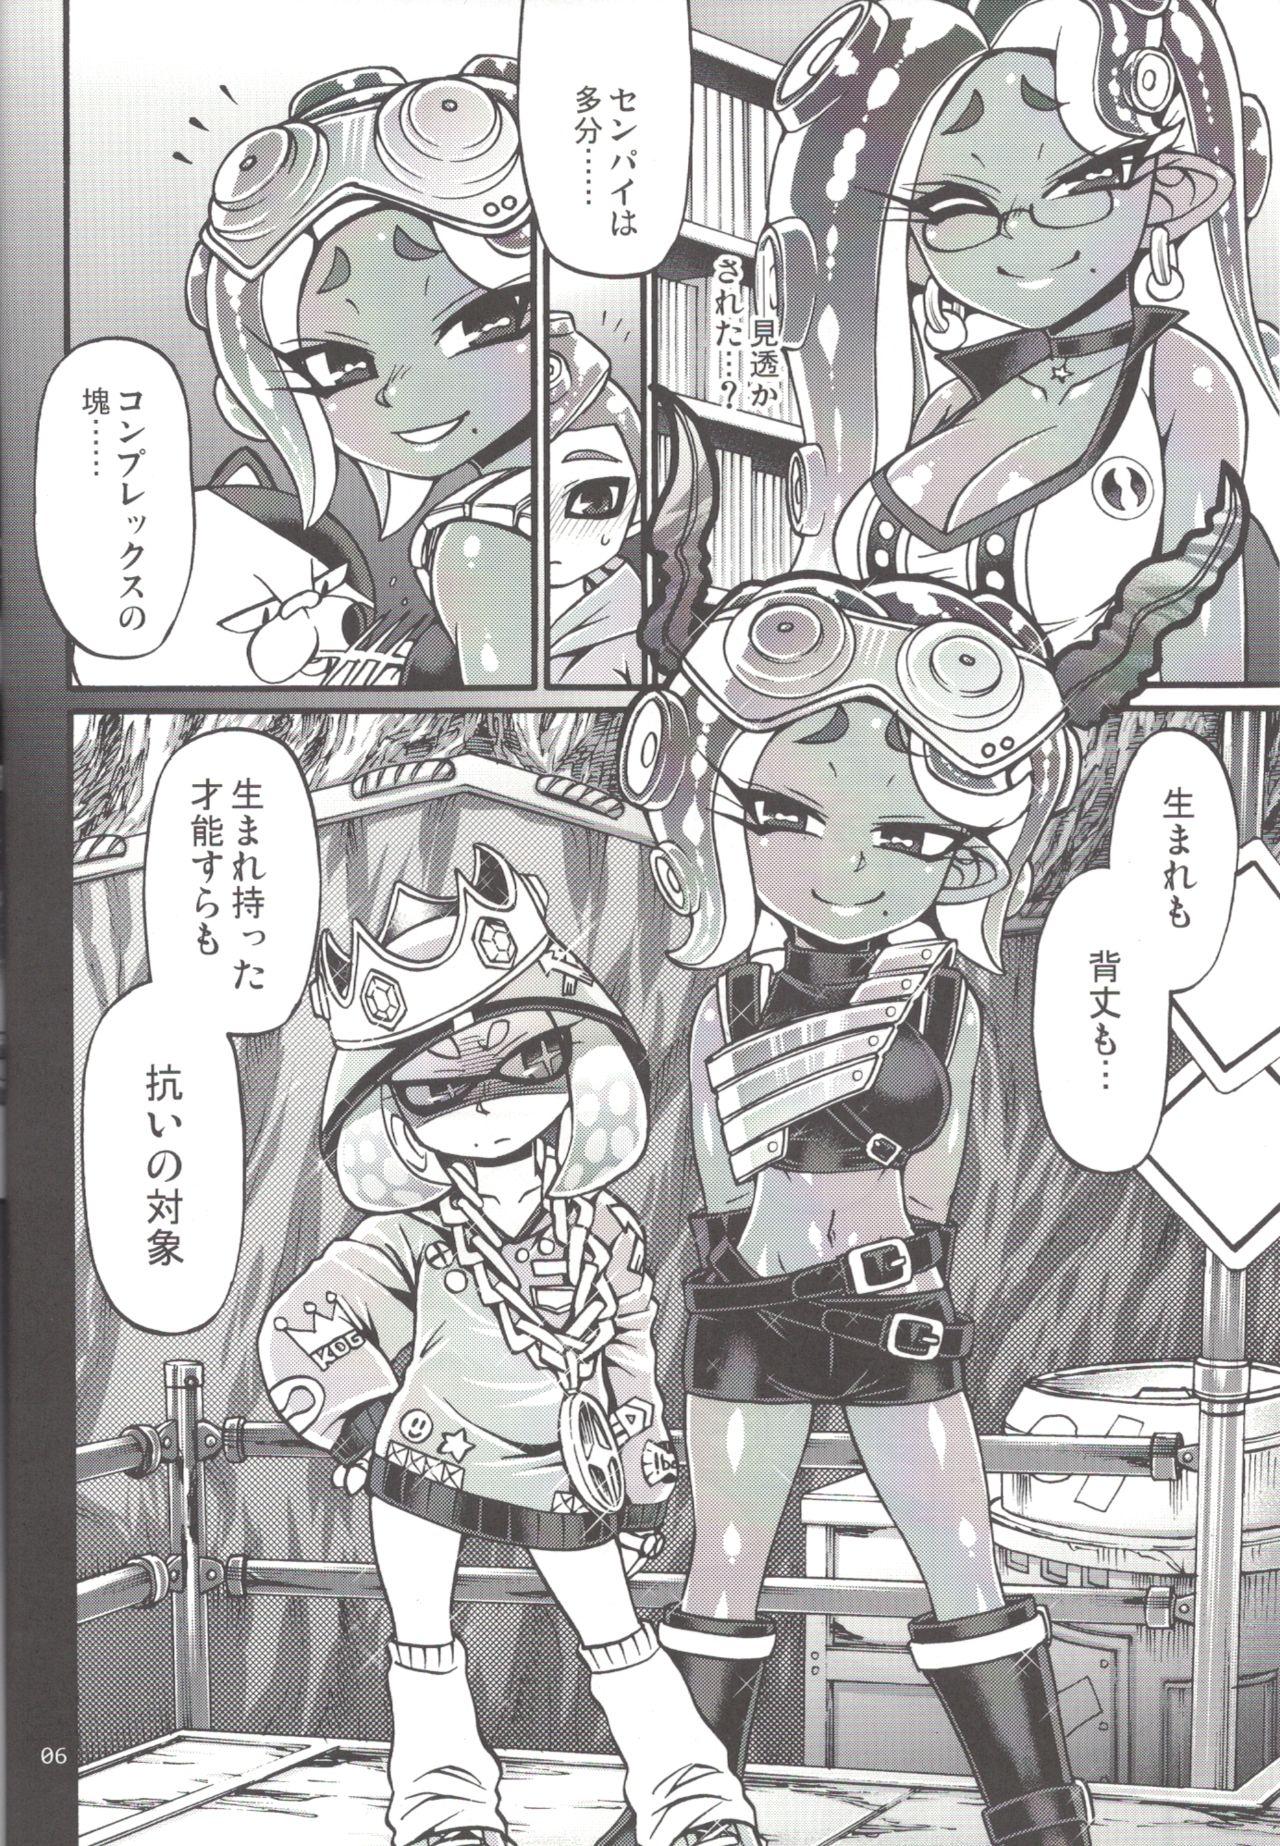 Boobs Slowly you will be loved - Splatoon Rough Porn - Page 5